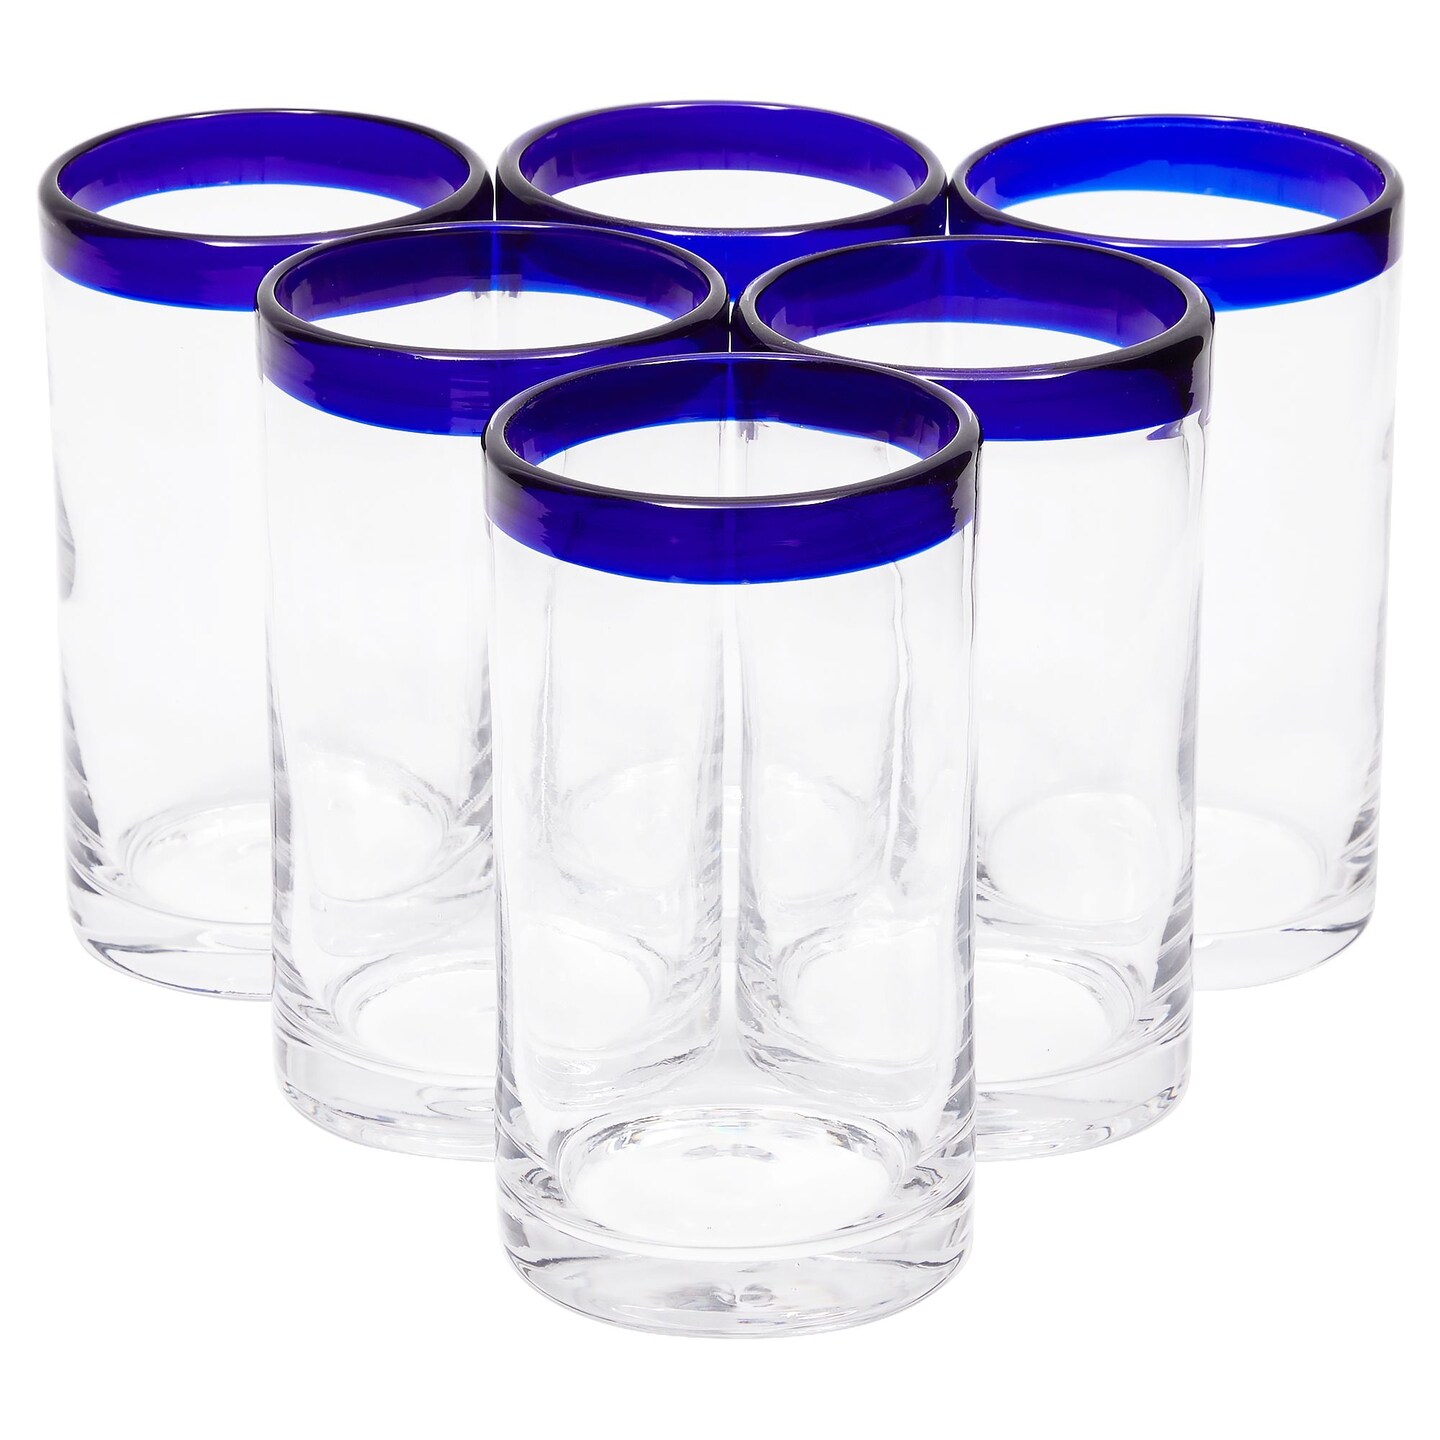 Set Of 6 Hand Blown Mexican Drinking Glasses 14 Oz Cobalt Blue Rimmed Glassware Michaels